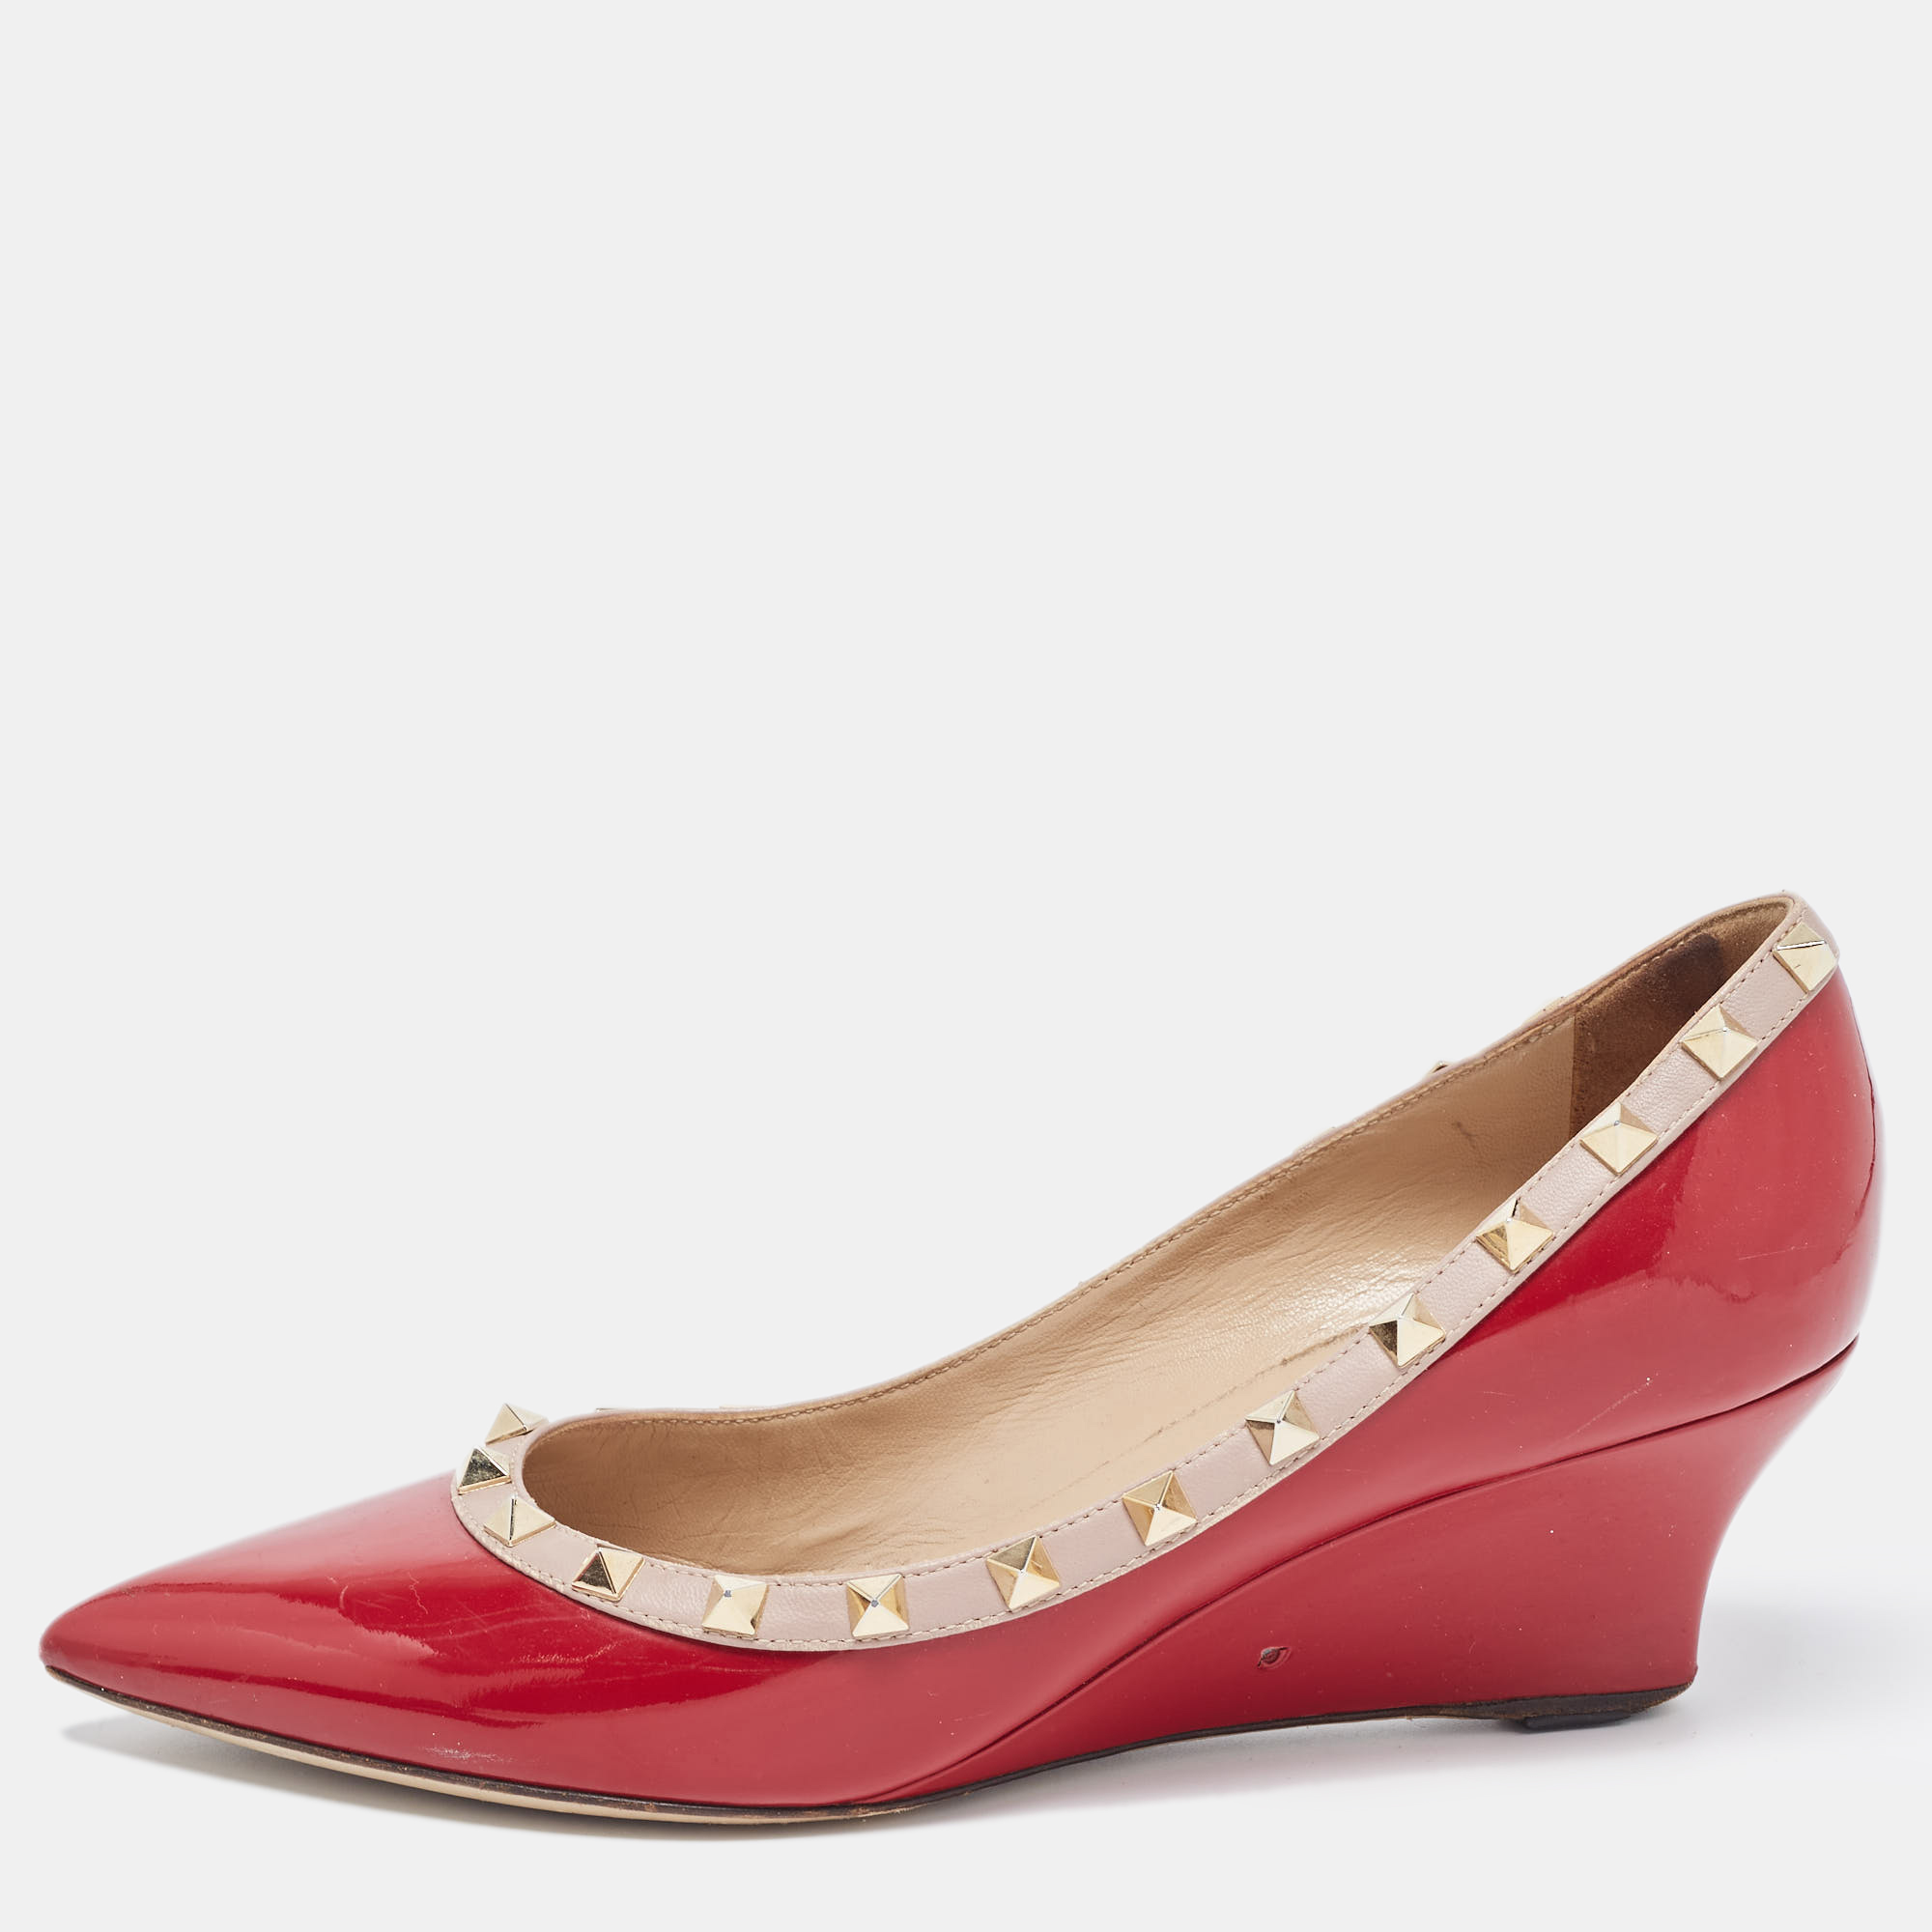 Valentino red/beige patent and leather wedge rockstud pumps size 39